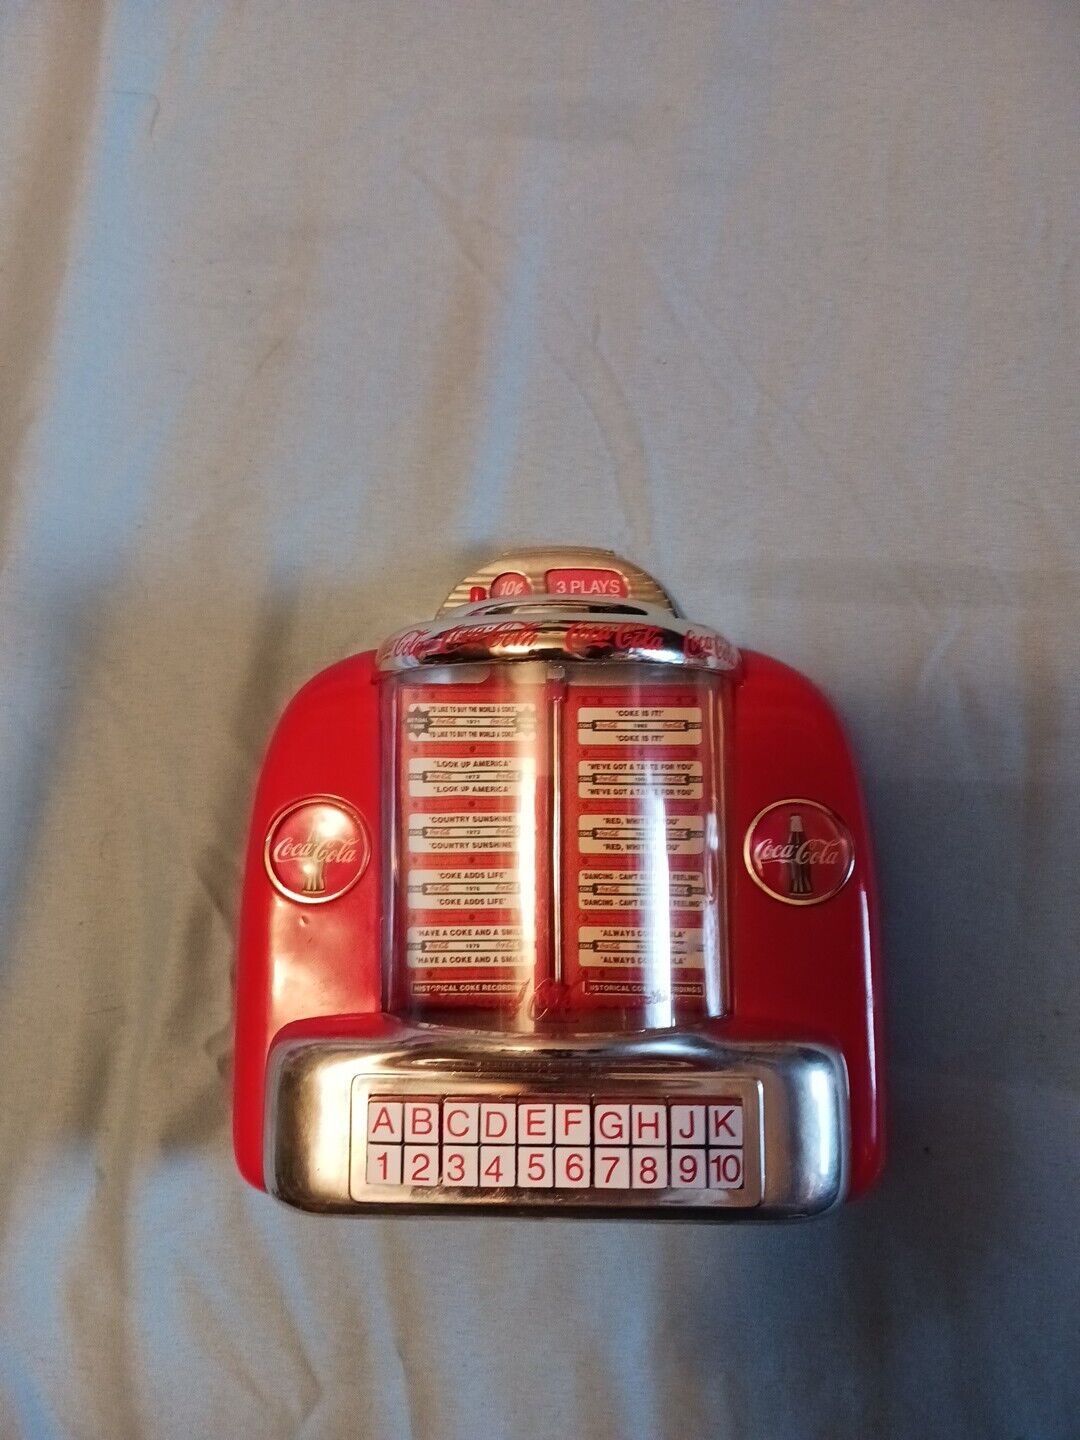 1996 Coca-Cola Mini Musical Coin Bank Jukebox Tested Working 